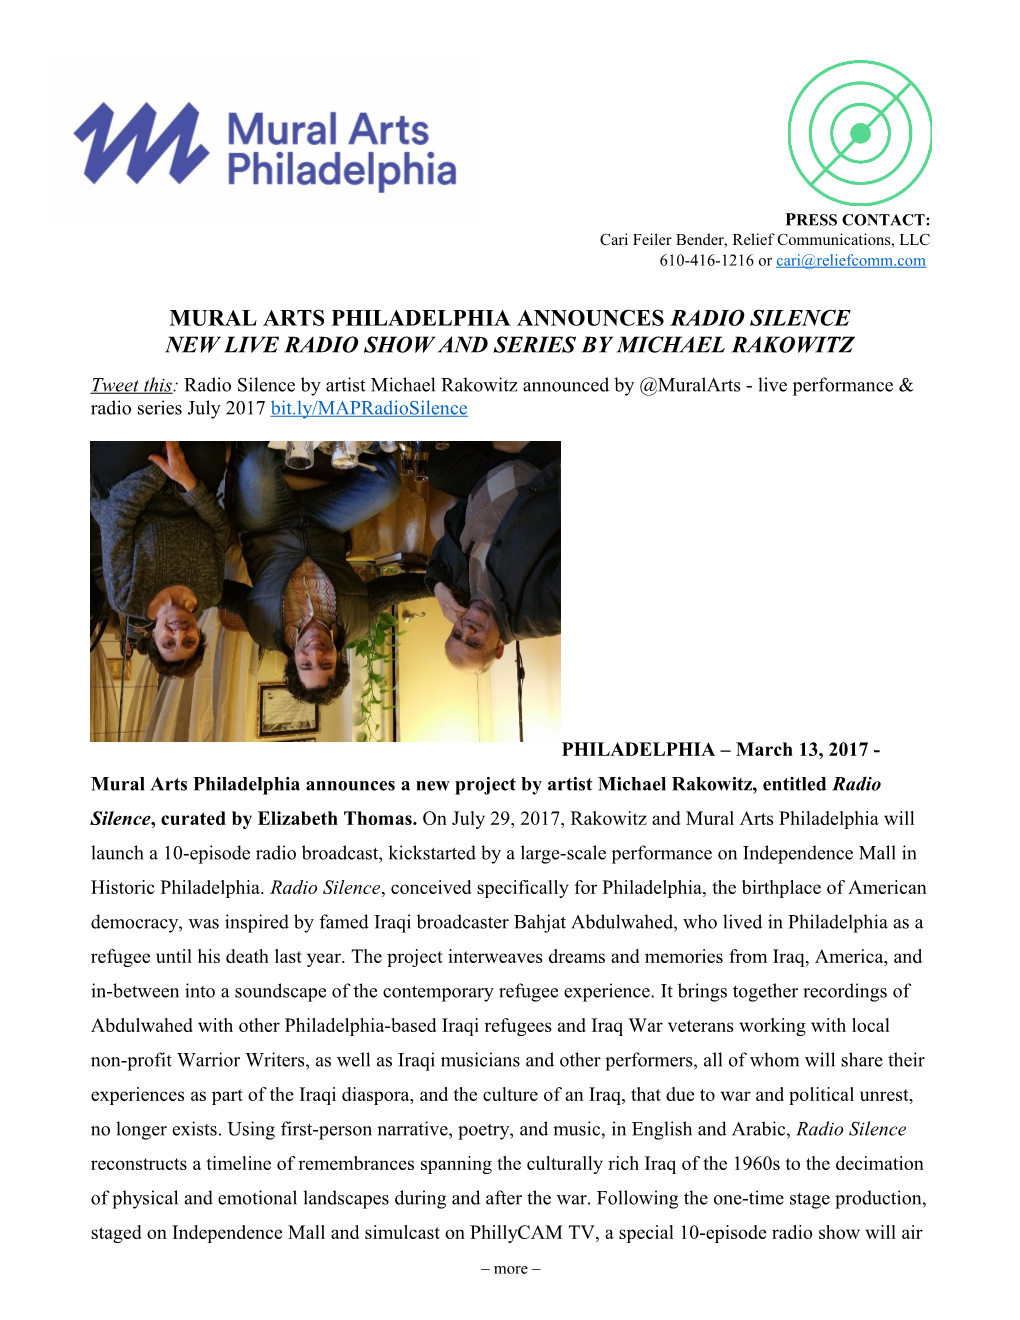 Mural Arts Philadelphia Announces Radio Silence Project * Page 1 of 4